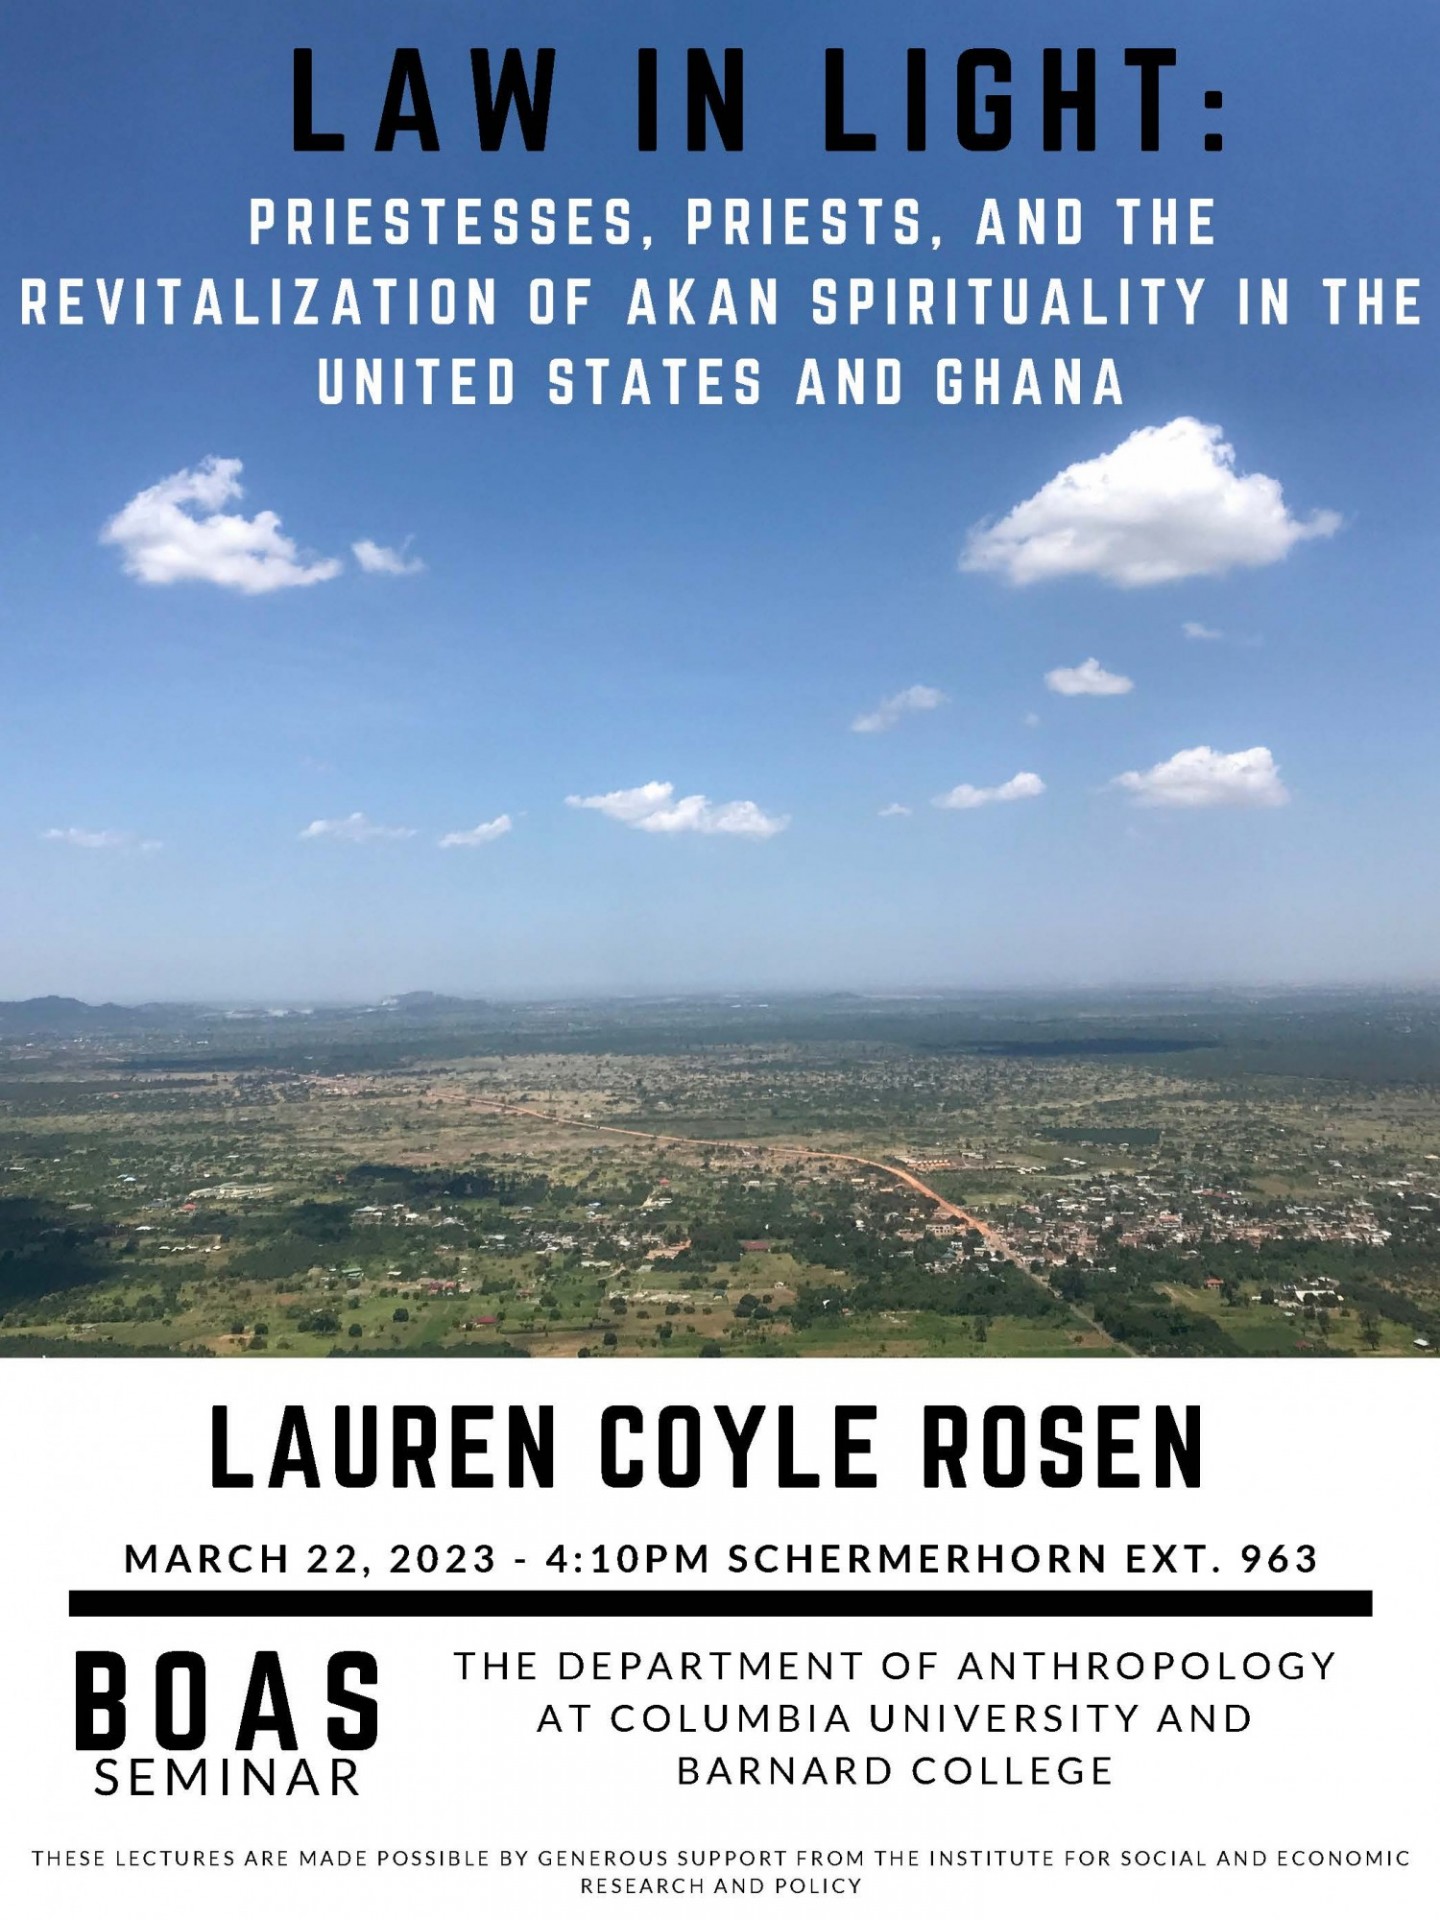 event poster: BOAS SEMINAR - Lauren Coyle-Rosen, 'Law in Light: Priestesses, Priests, and the Revitalization of Akan Spirituality in the United States and Ghana'